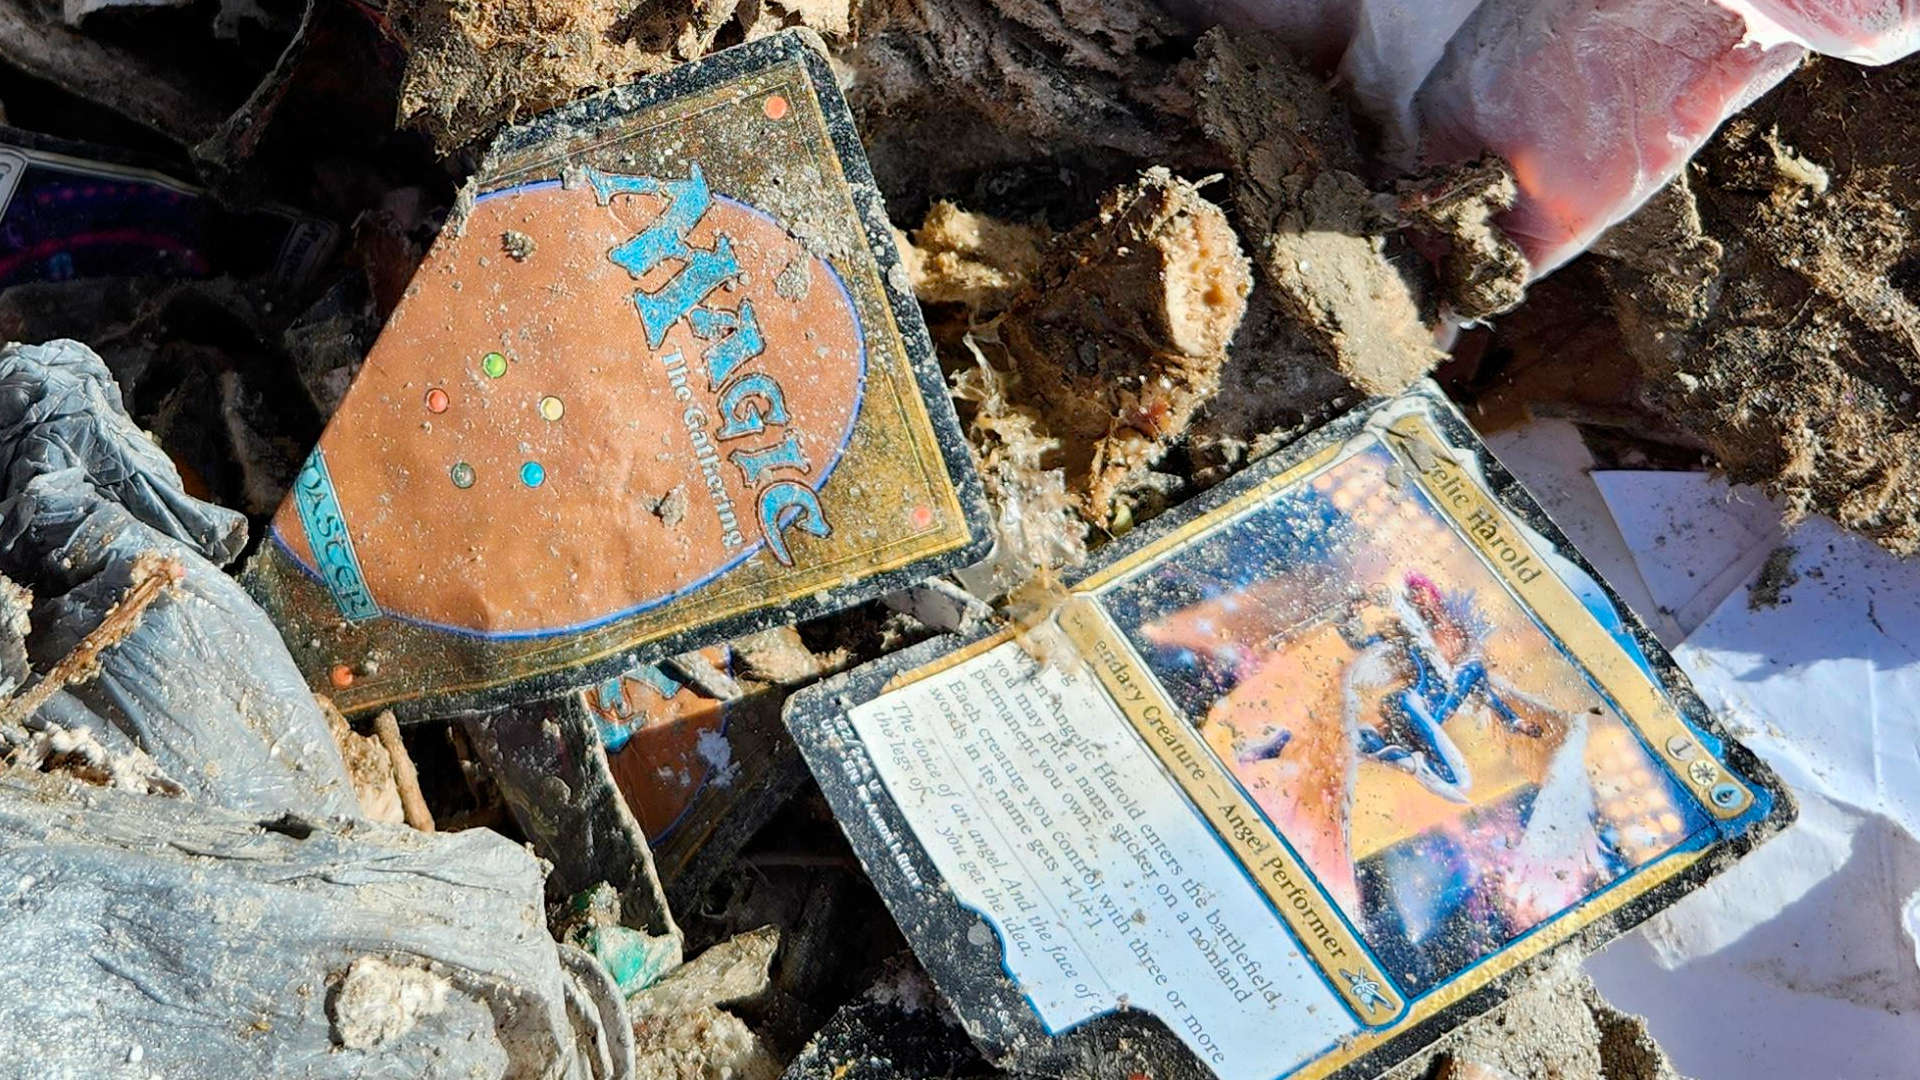 Image for Thousands of dollars worth of pristine Magic: The Gathering boosters were discovered in a garbage dump, then destroyed